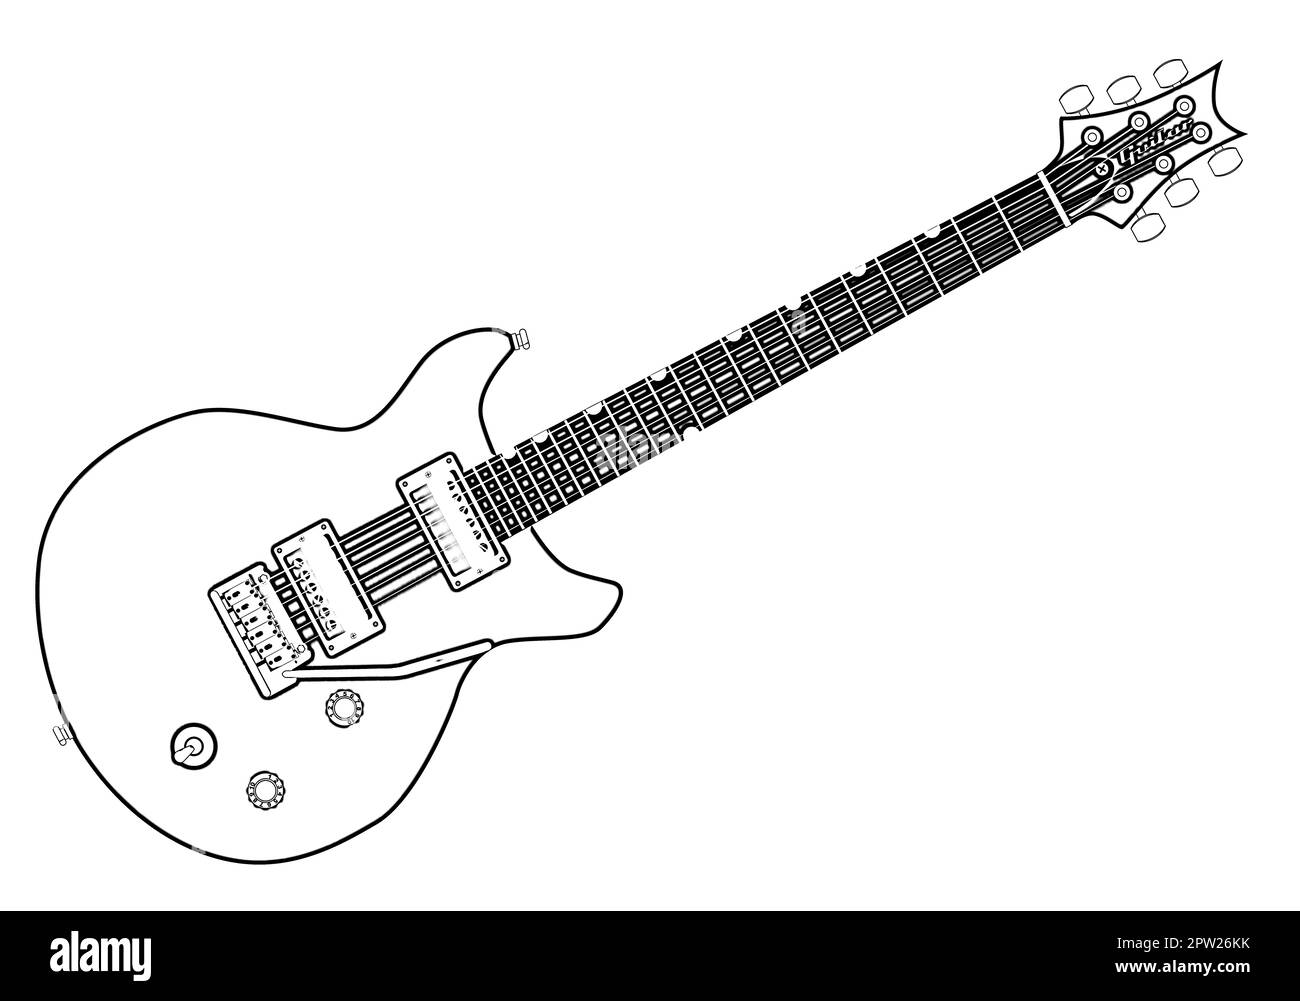 A typical double cutaway electric guitar in outline over white Stock Photo